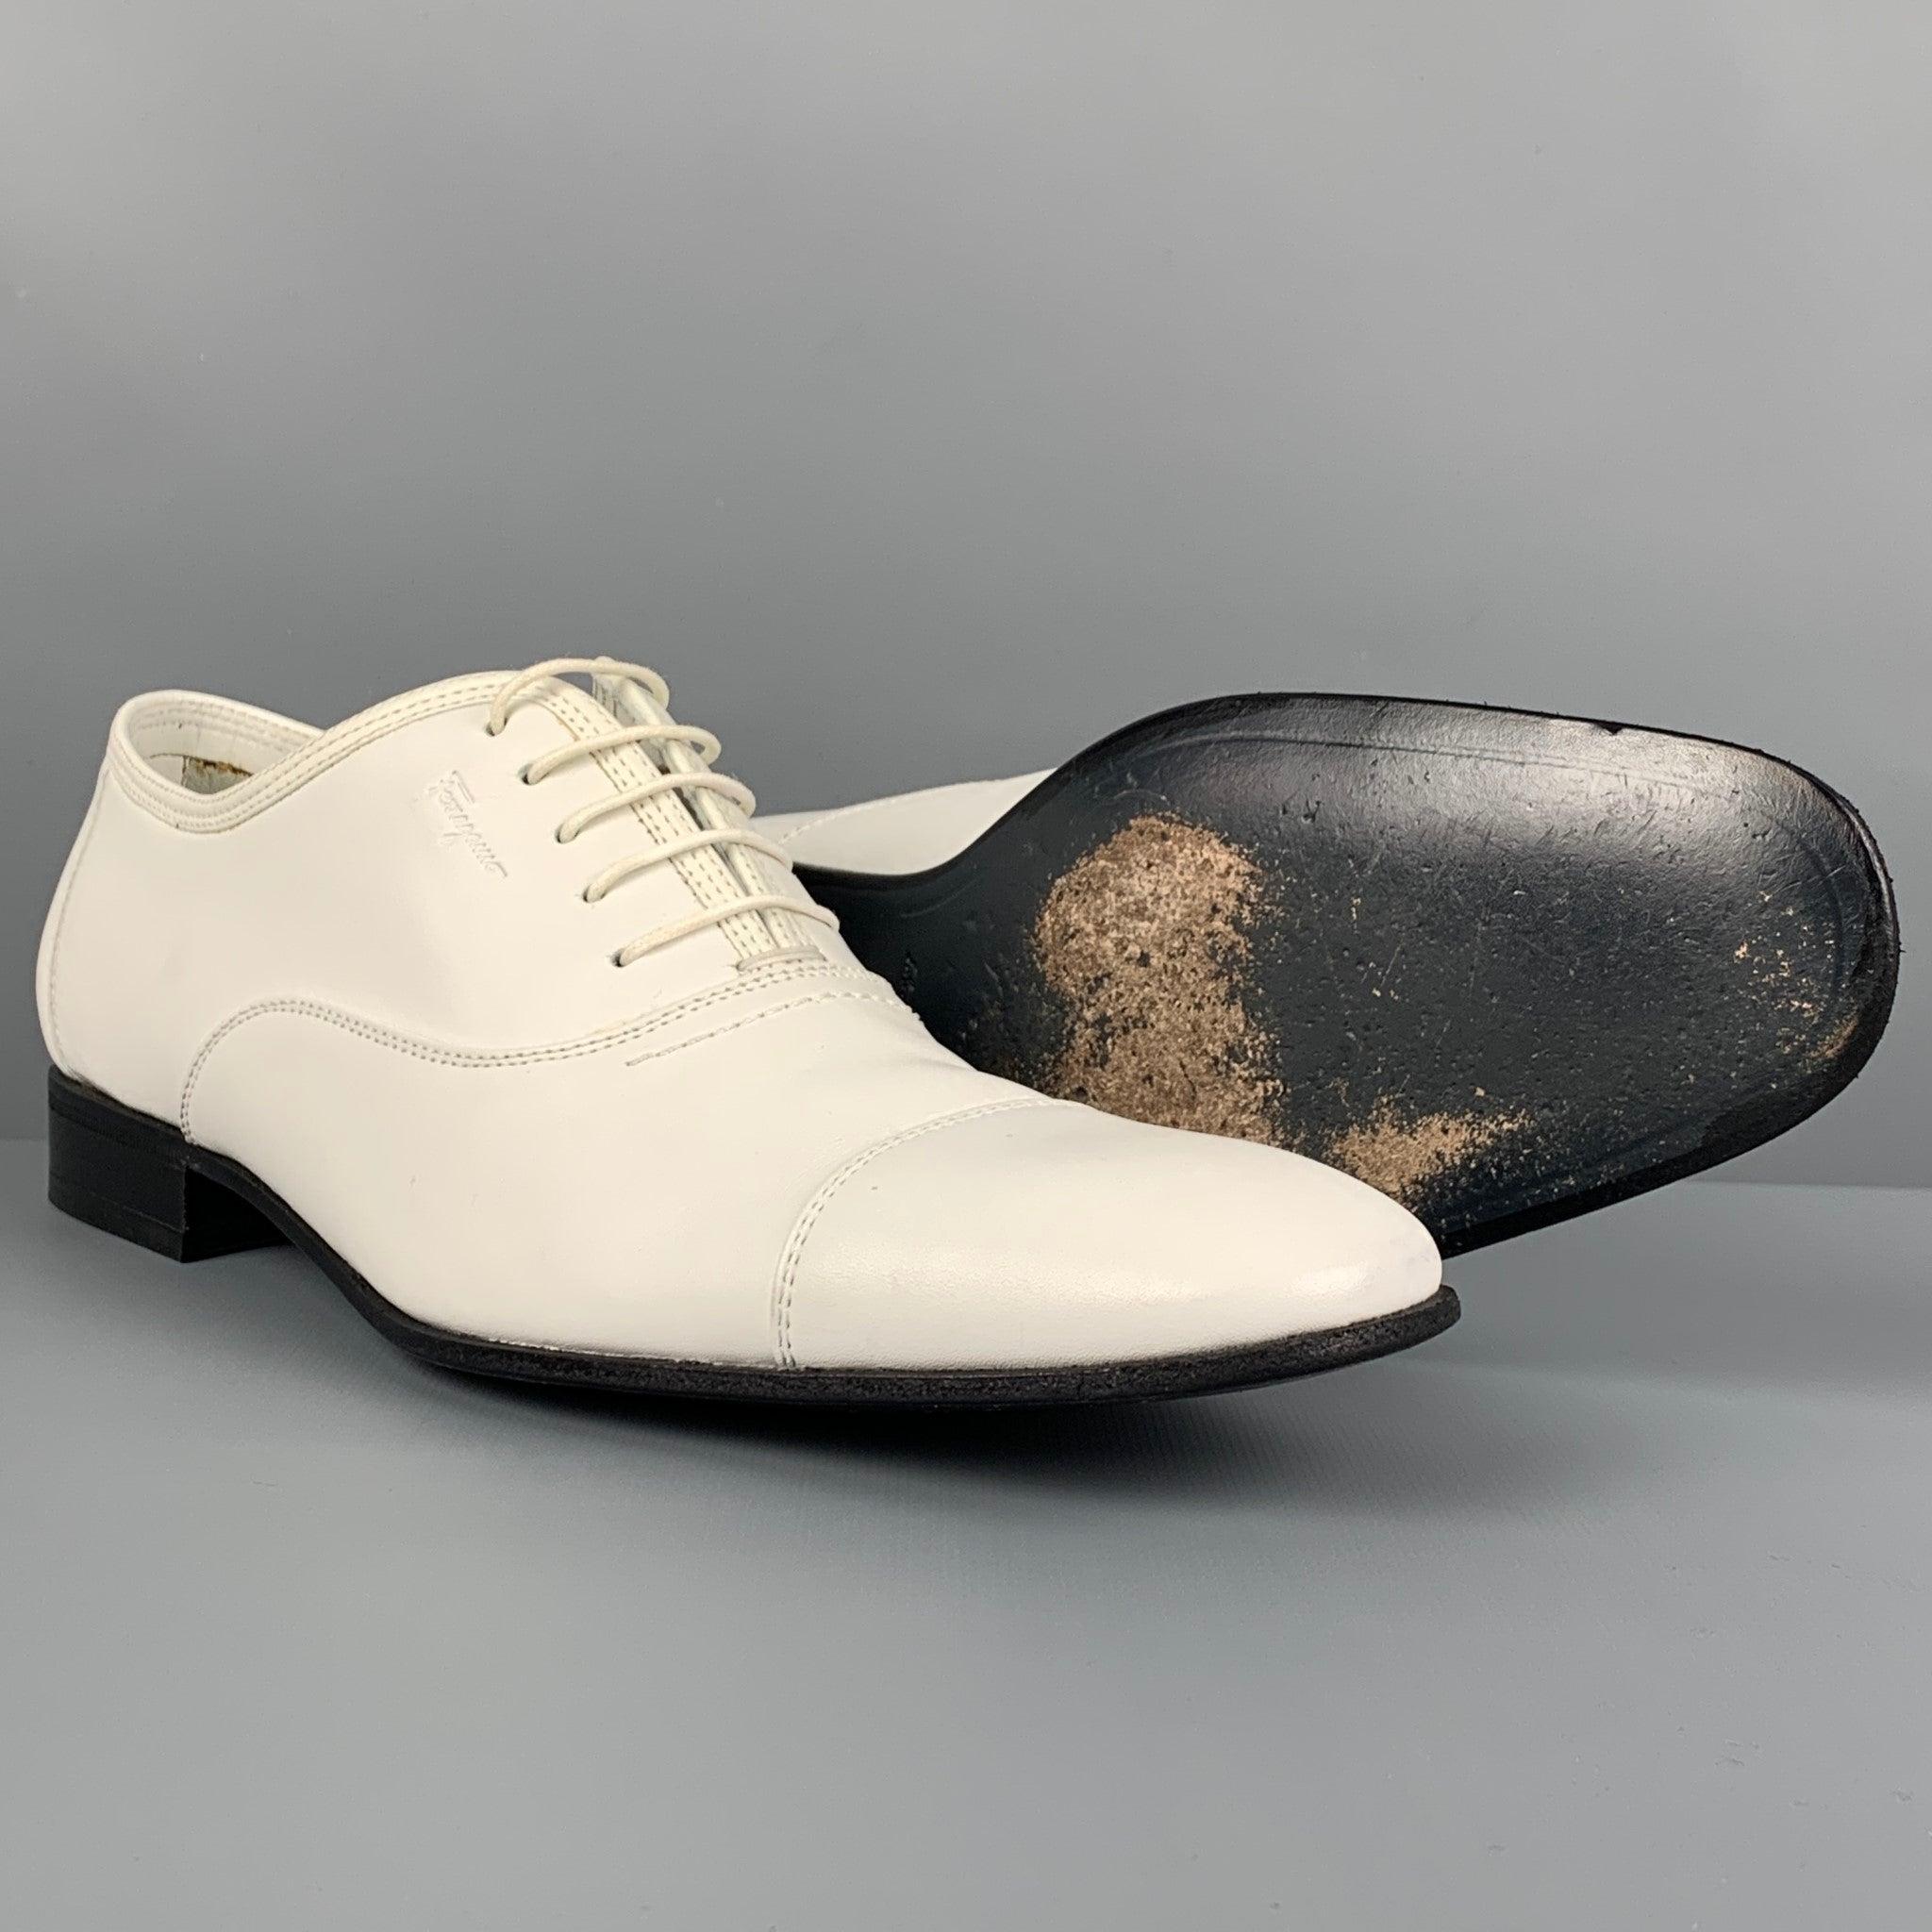 SALVATORE FERRAGAMO Size 9 White Leather Cap Toe Lace Up Shoes In Good Condition For Sale In San Francisco, CA